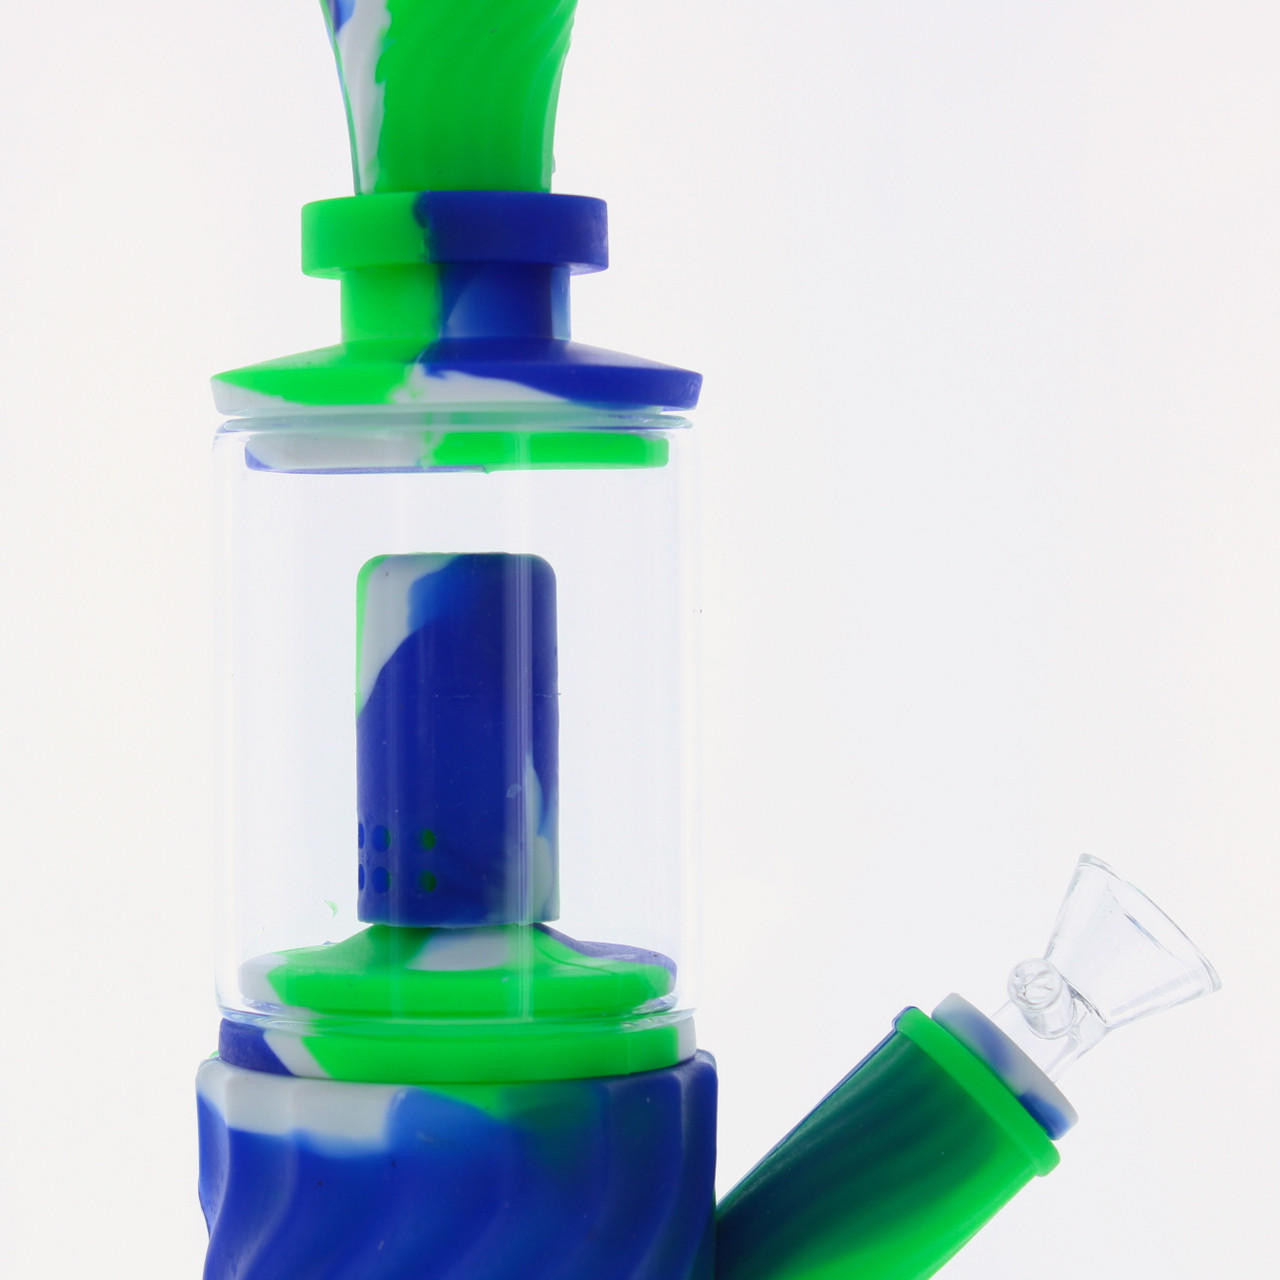 https://cdn11.bigcommerce.com/s-28tw9v9waz/images/stencil/1280x1280/products/1900/8599/vapebrat-11-4-in-1-silicone-glass-hybrid-water-pipe-nectar-collector-and-mini-rig-green-white-and-blue__47190.1681847843.jpg?c=1?imbypass=on